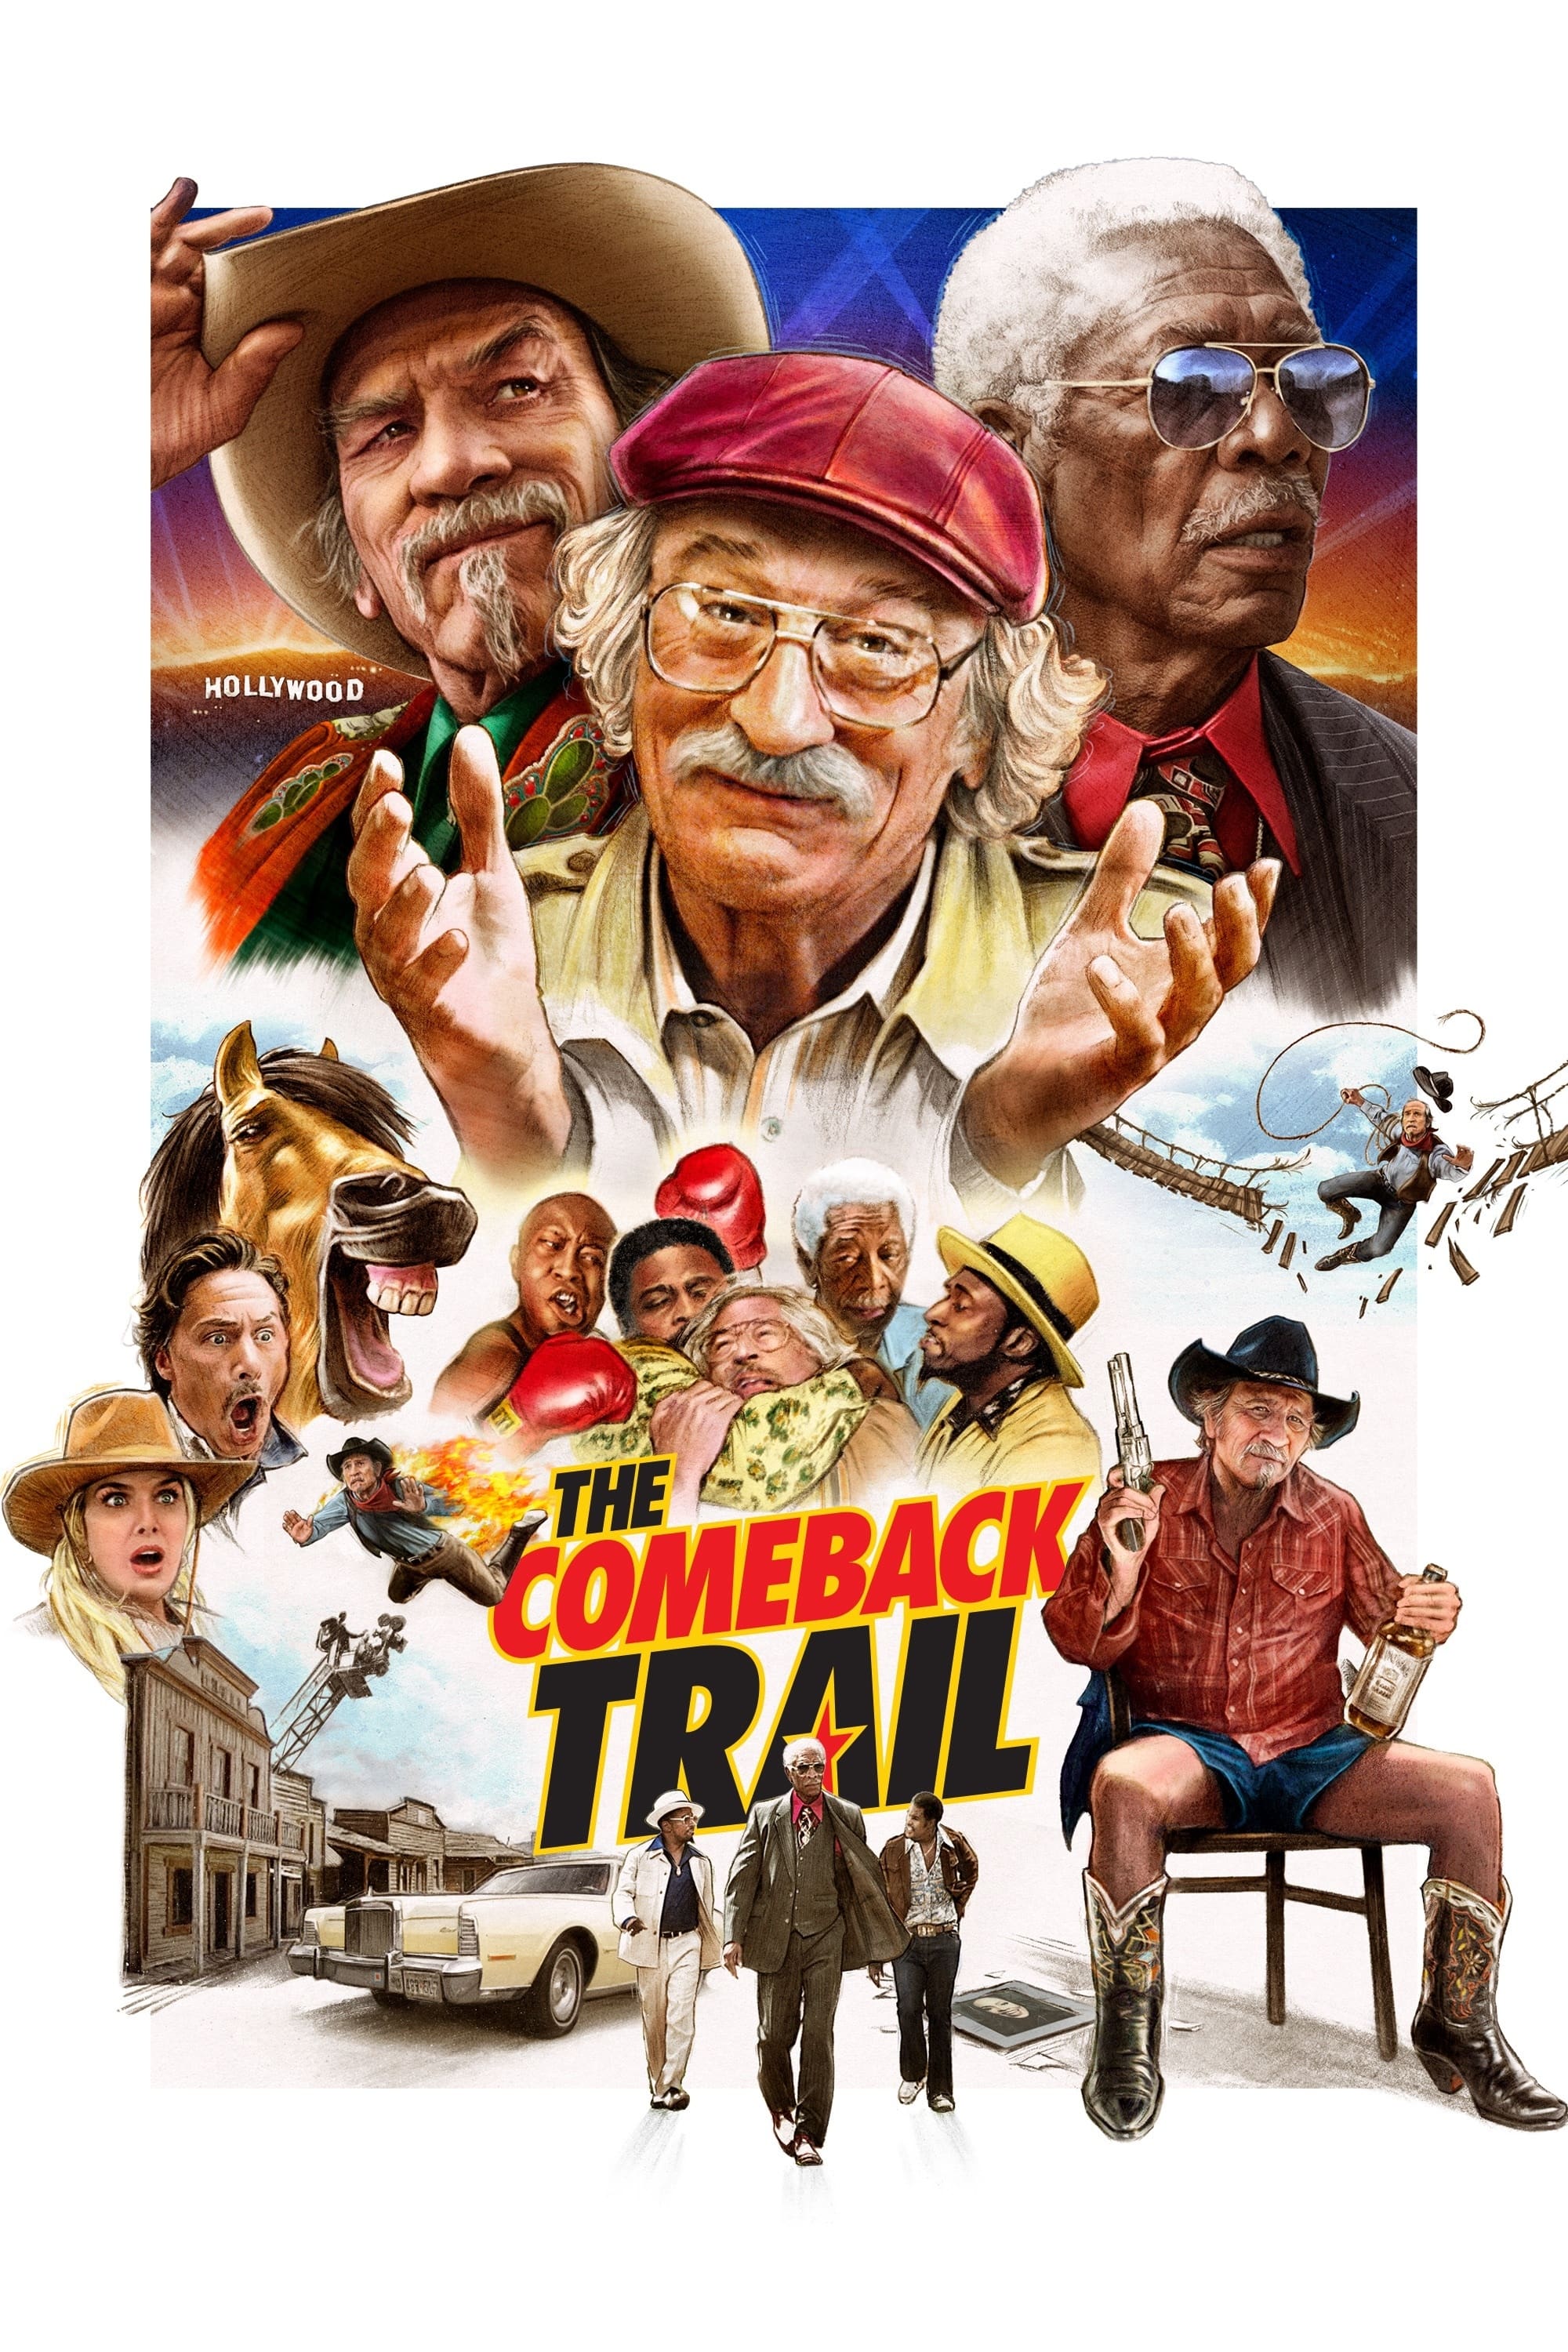 The Comeback Trail 2020 Movie How To Watch Streaming Online Reviews